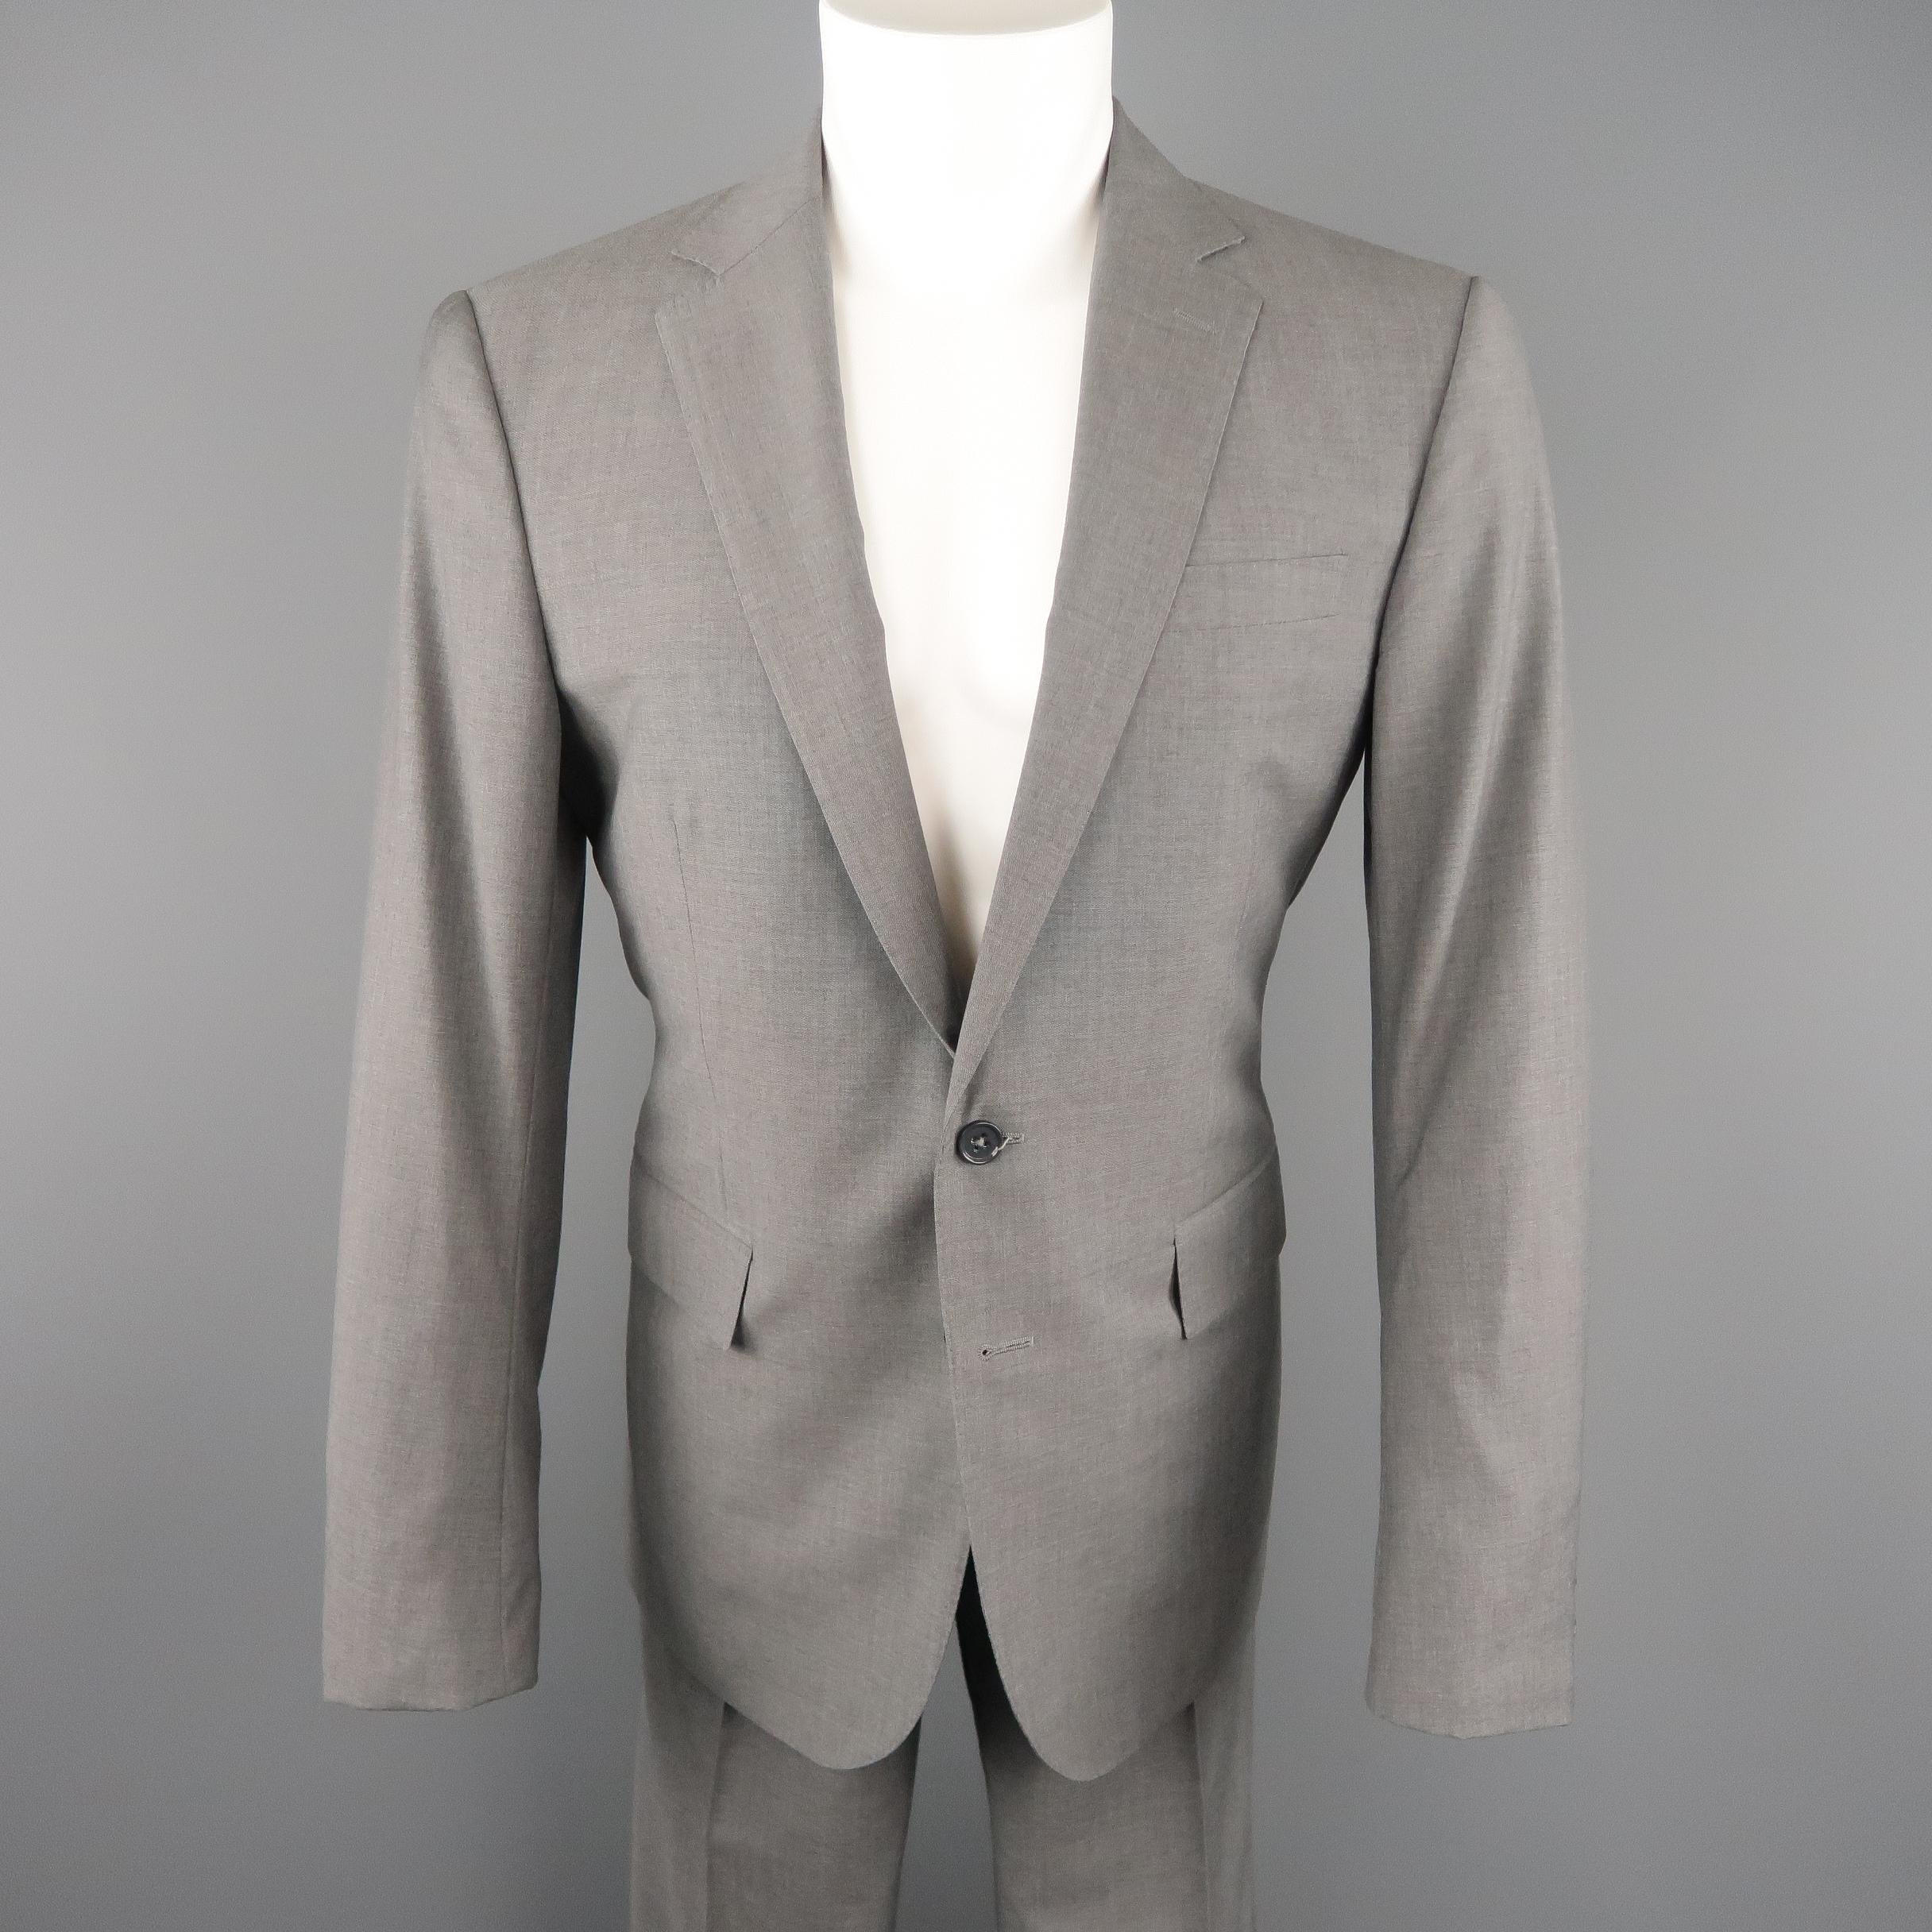 RALPH LAUREN BLACK LABEL suit comes in heather gray wool and includes a single breasted, notch lapel, two button sport coat with matching flat front, side tab trousers. Made in Italy.
 
Excellent Pre-Owned Condition. Retails: $1,800.00.
Marked: 40